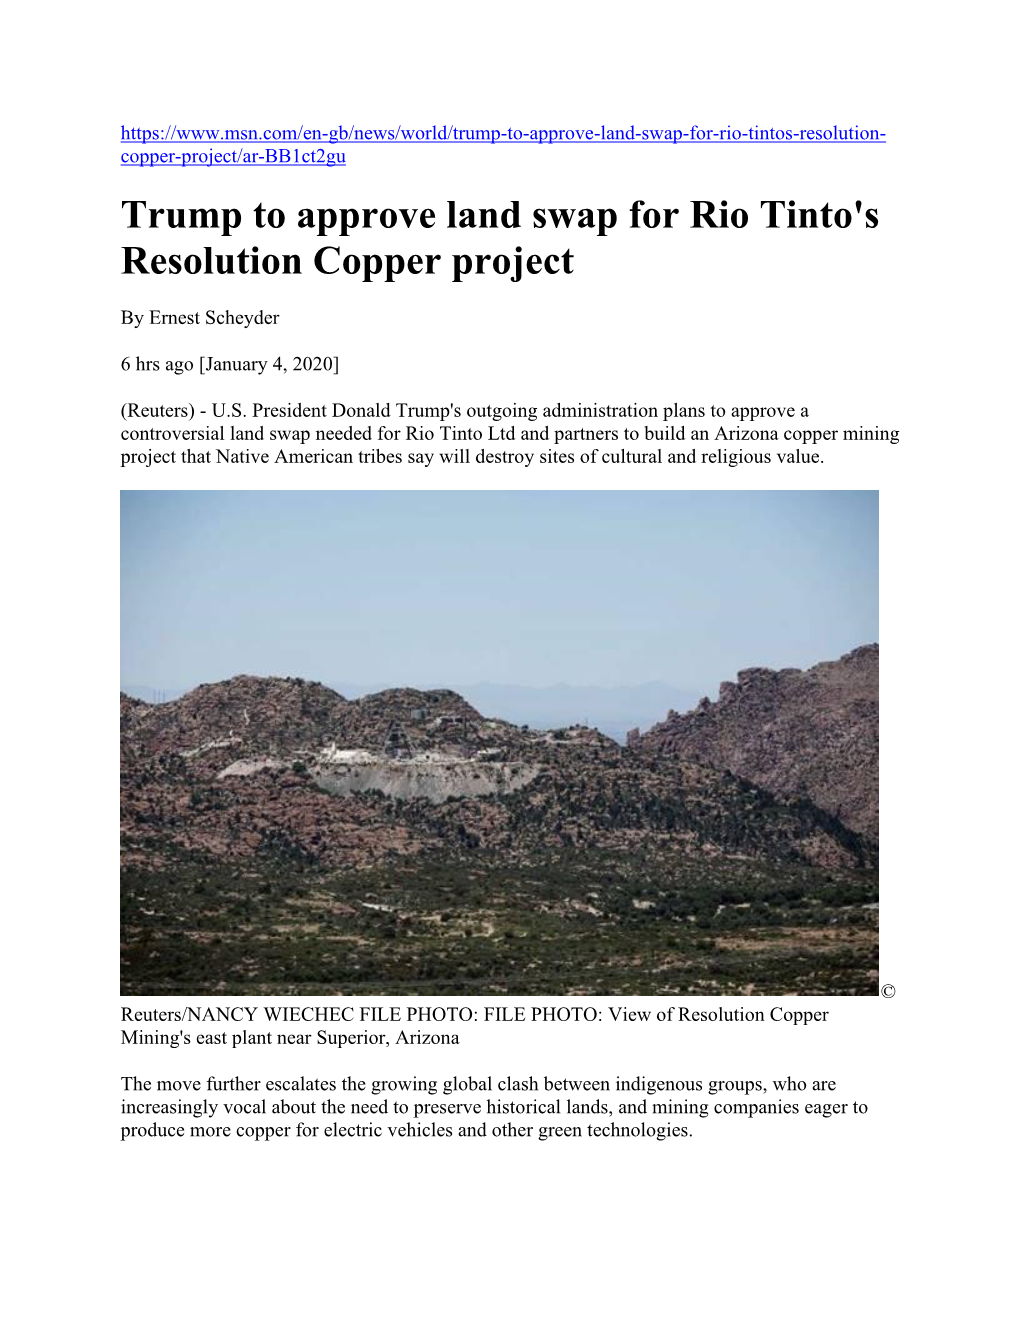 Trump to Approve Land Swap for Rio Tinto's Resolution Copper Project